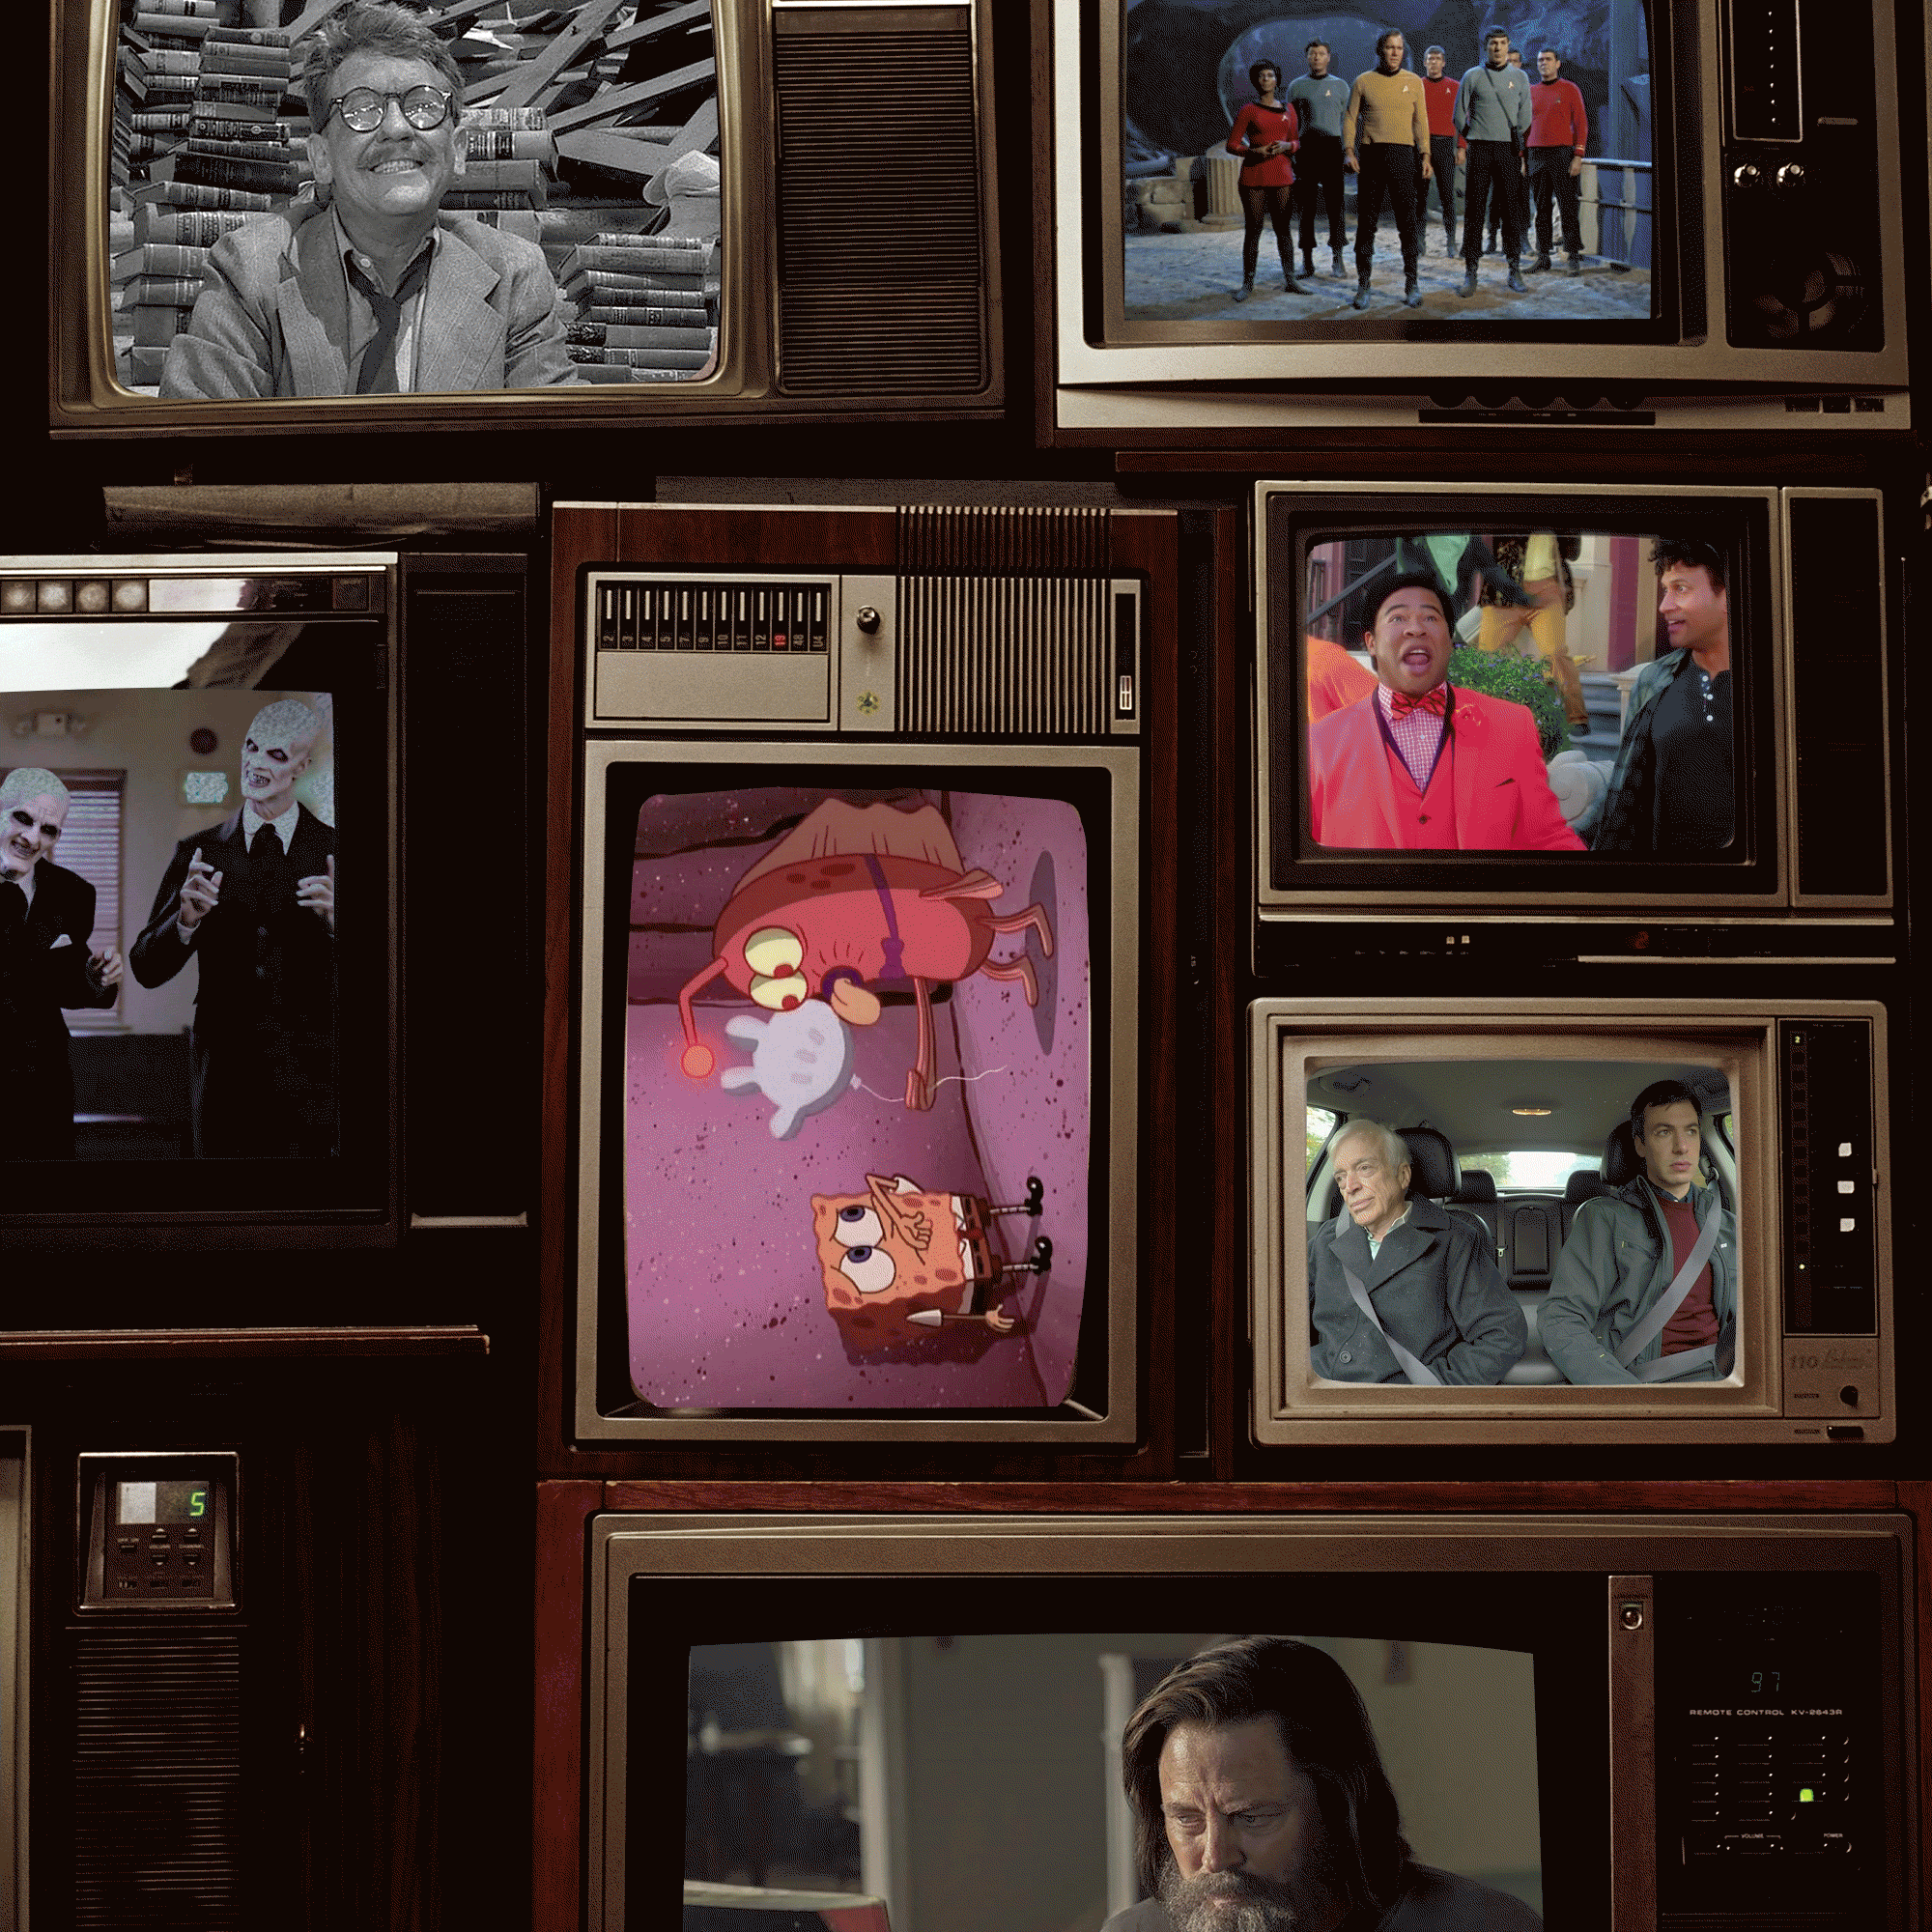 A series of old-fashioned TV sets flickering and displaying images from various television episodes.